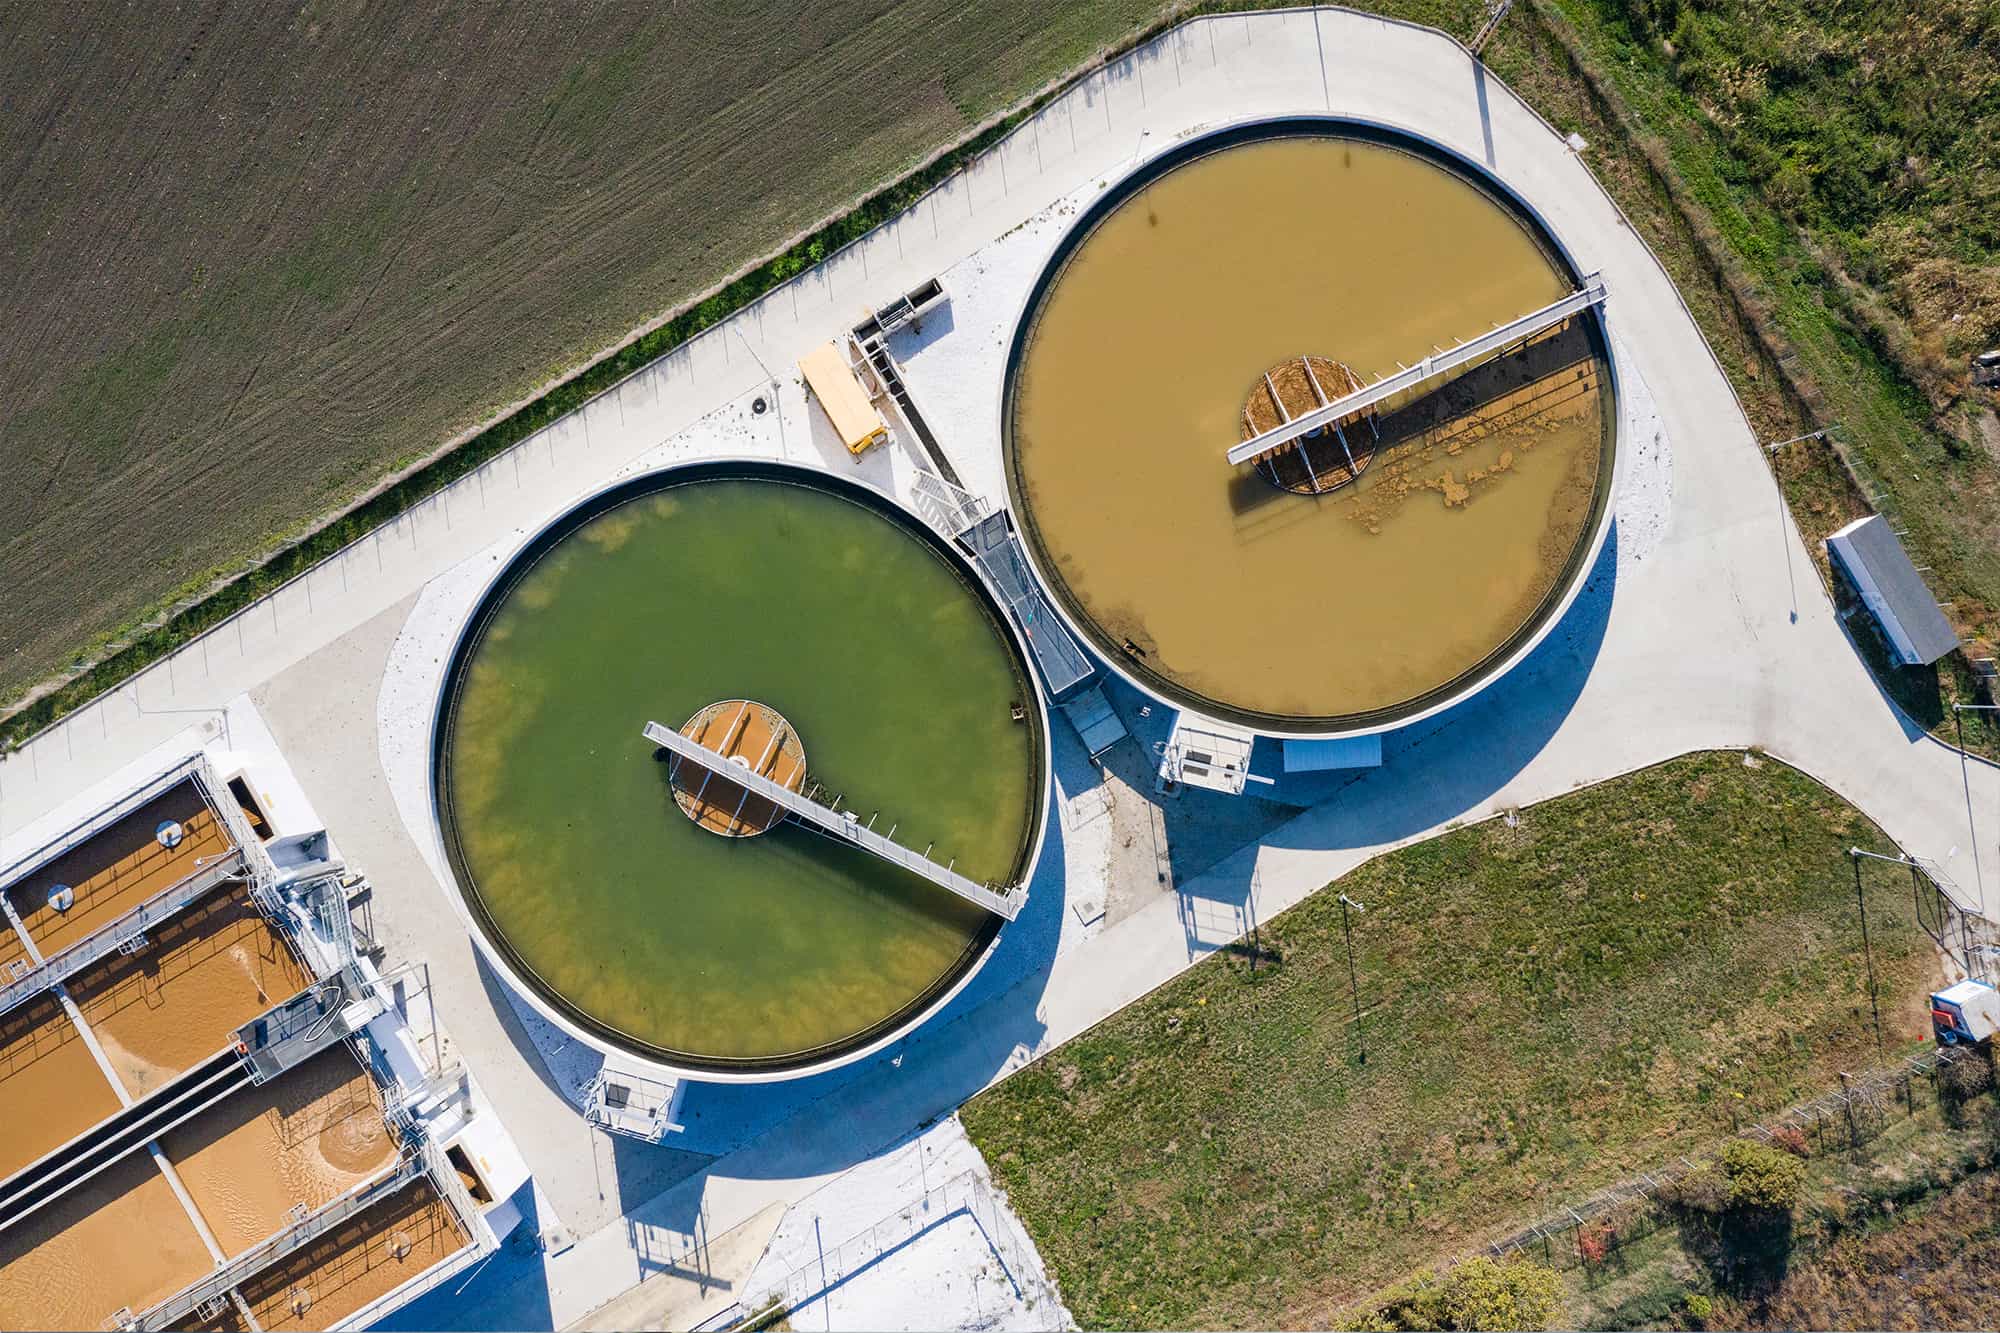 Wastewater treatment and reclamation